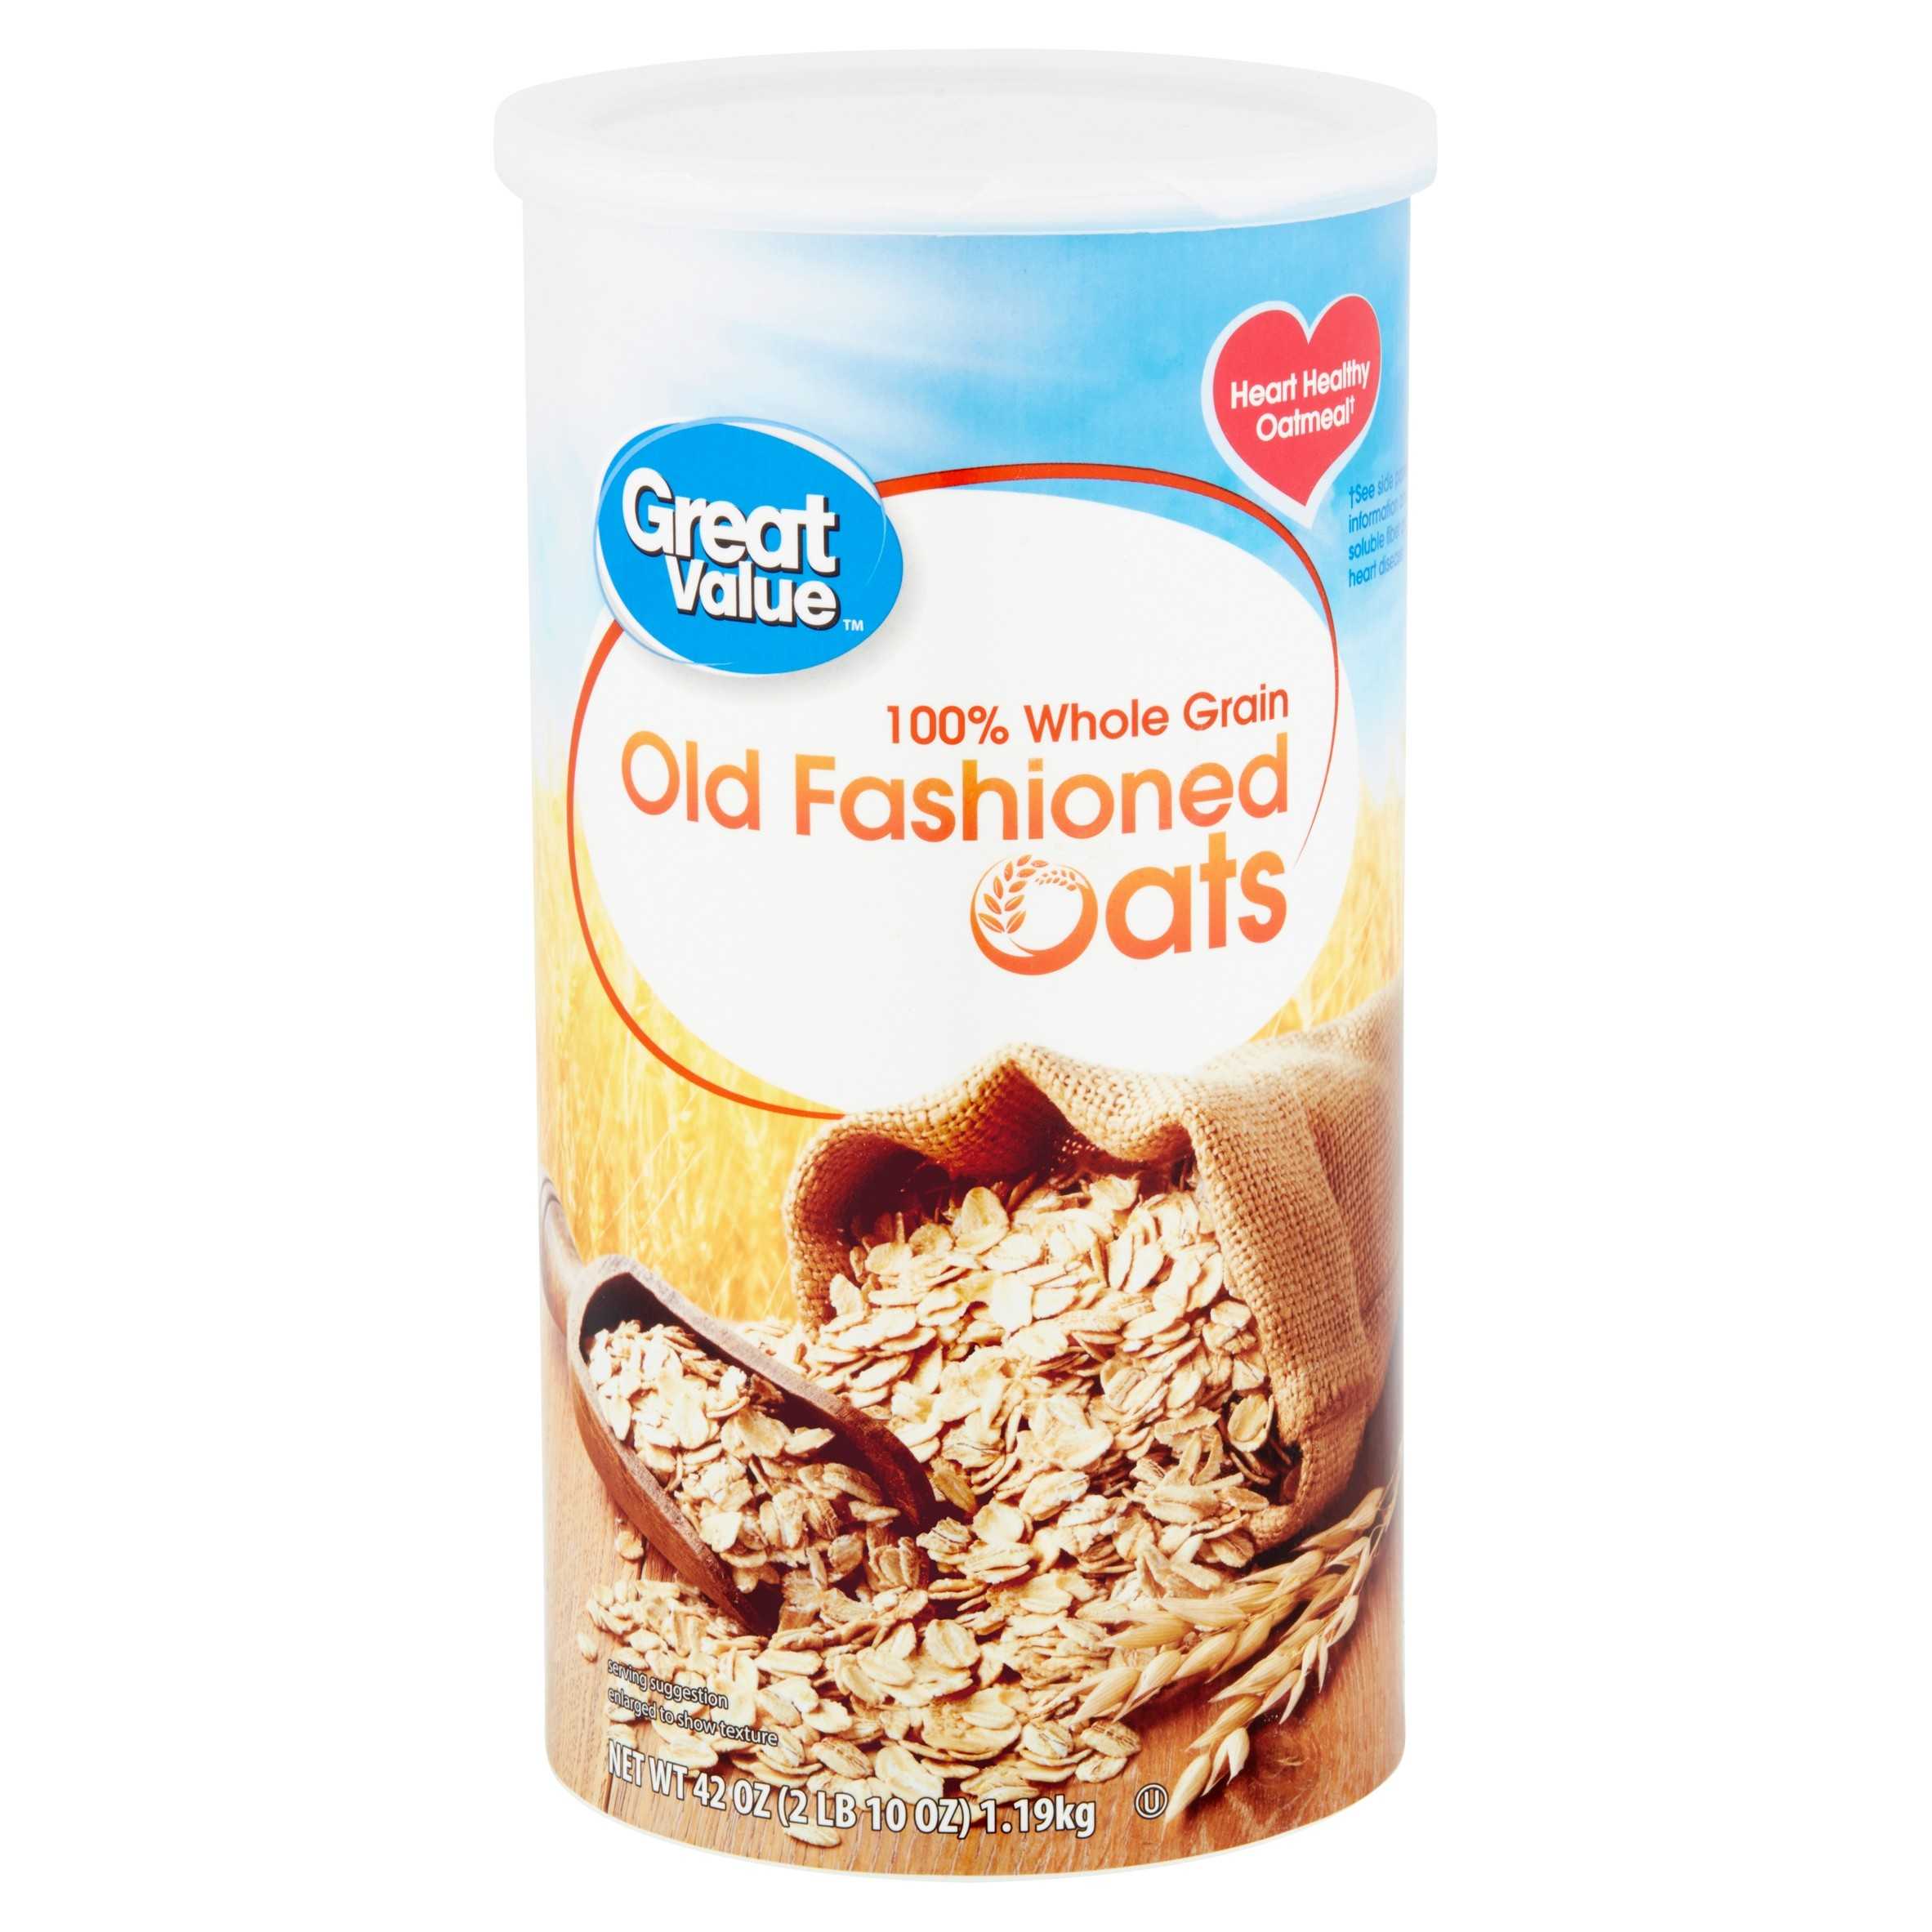 Great Value Old Fashioned Oats, 42 oz canister